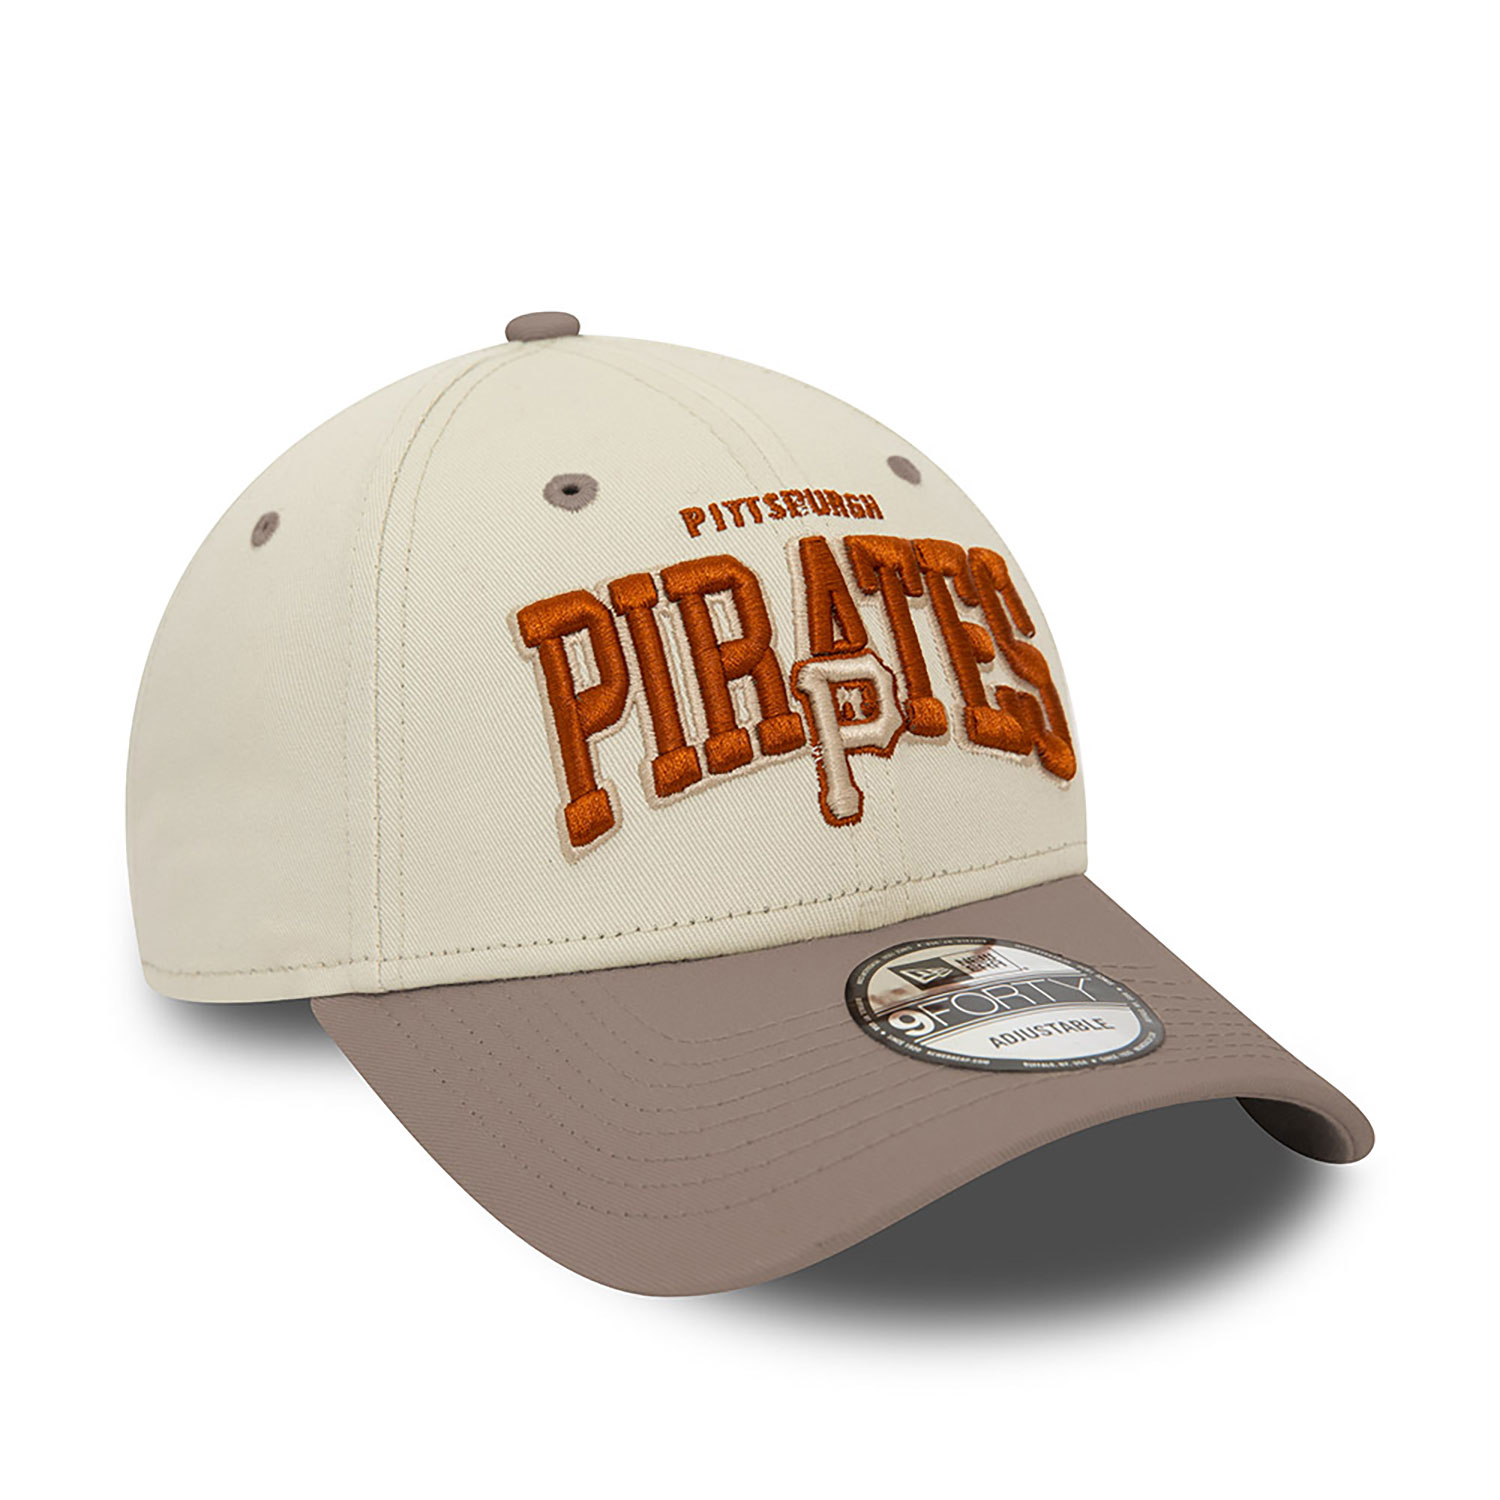 Pittsburgh Pirates White Crown Ivory 9FORTY Adjustable Cap